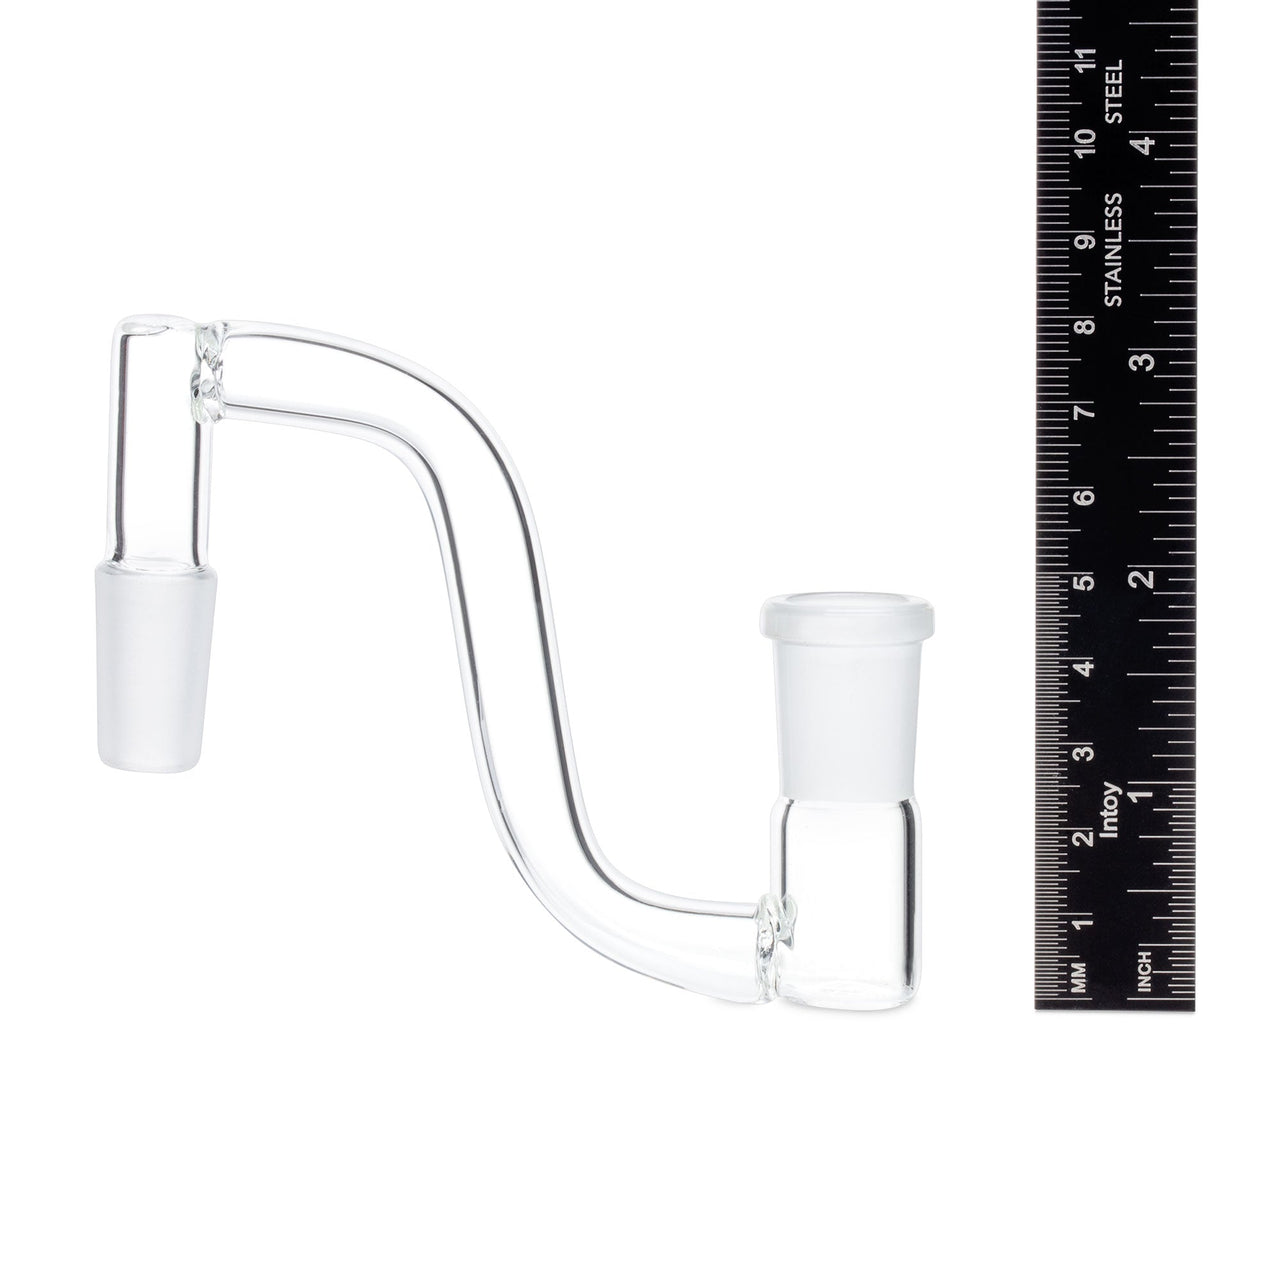 420 Science Dropdown Adapter | Dab Accessories | 420 Science